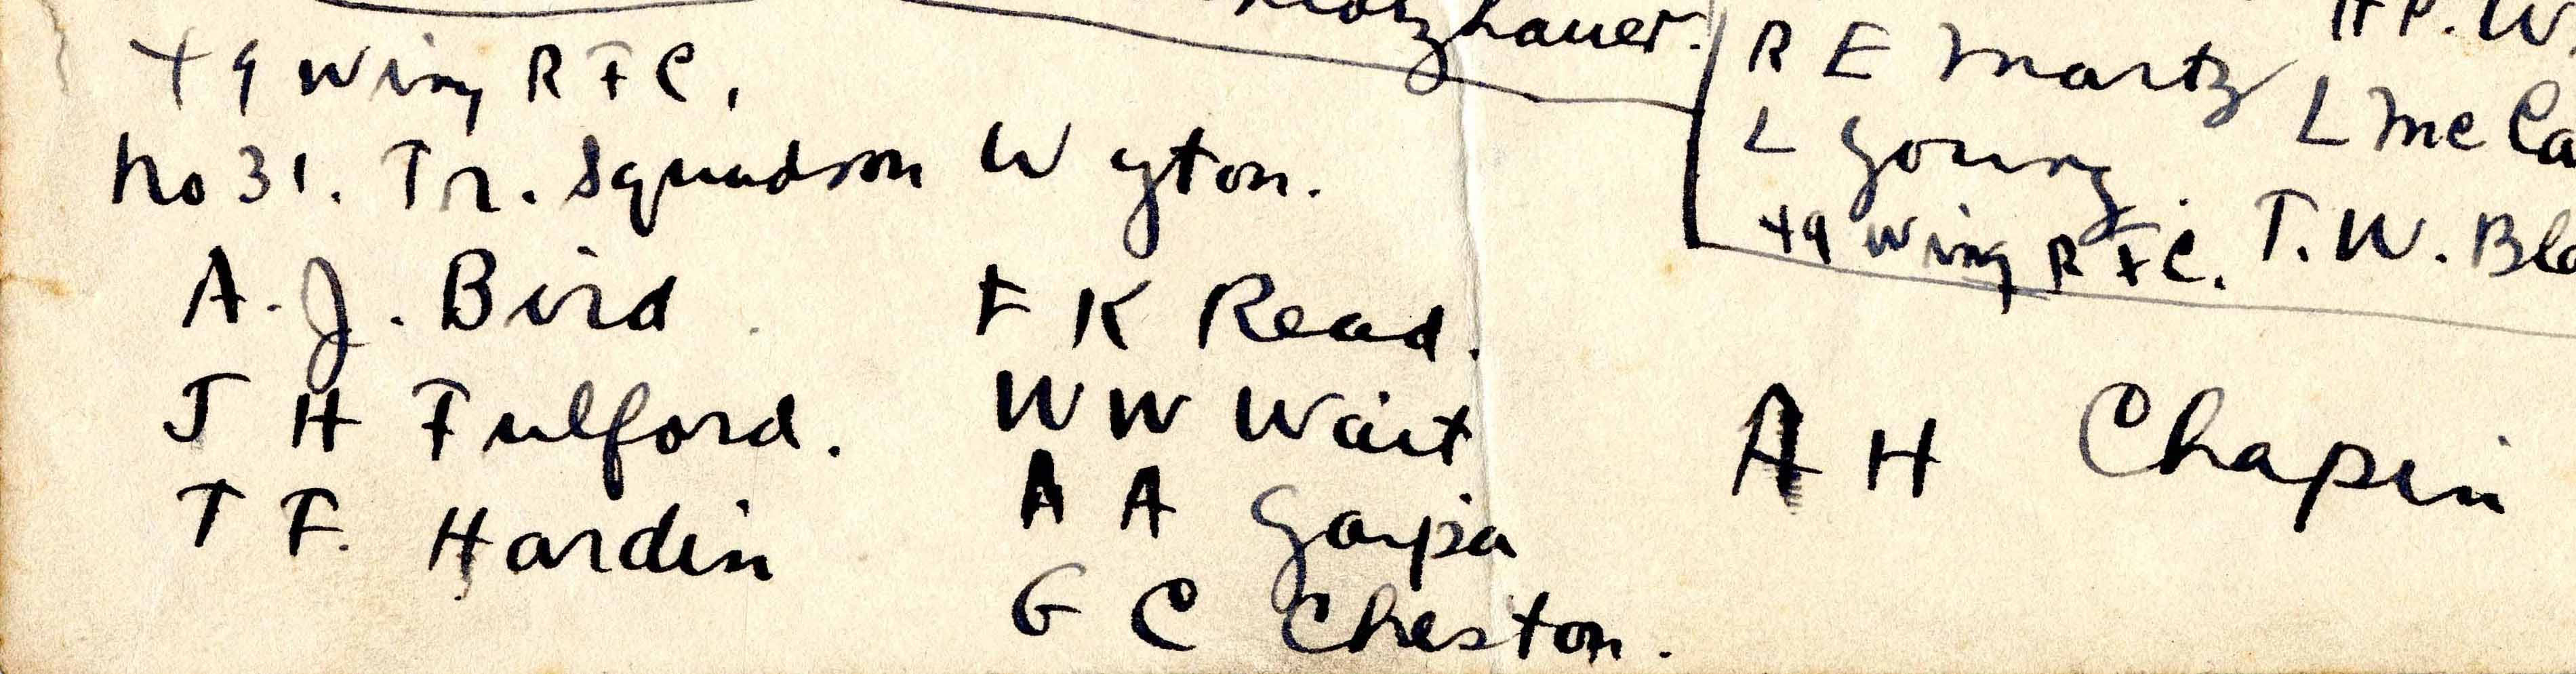 The bottom portion of Fremont Cutler Foss's list of who was posted where on December 3, 1917, showing the men who went to Wyton.